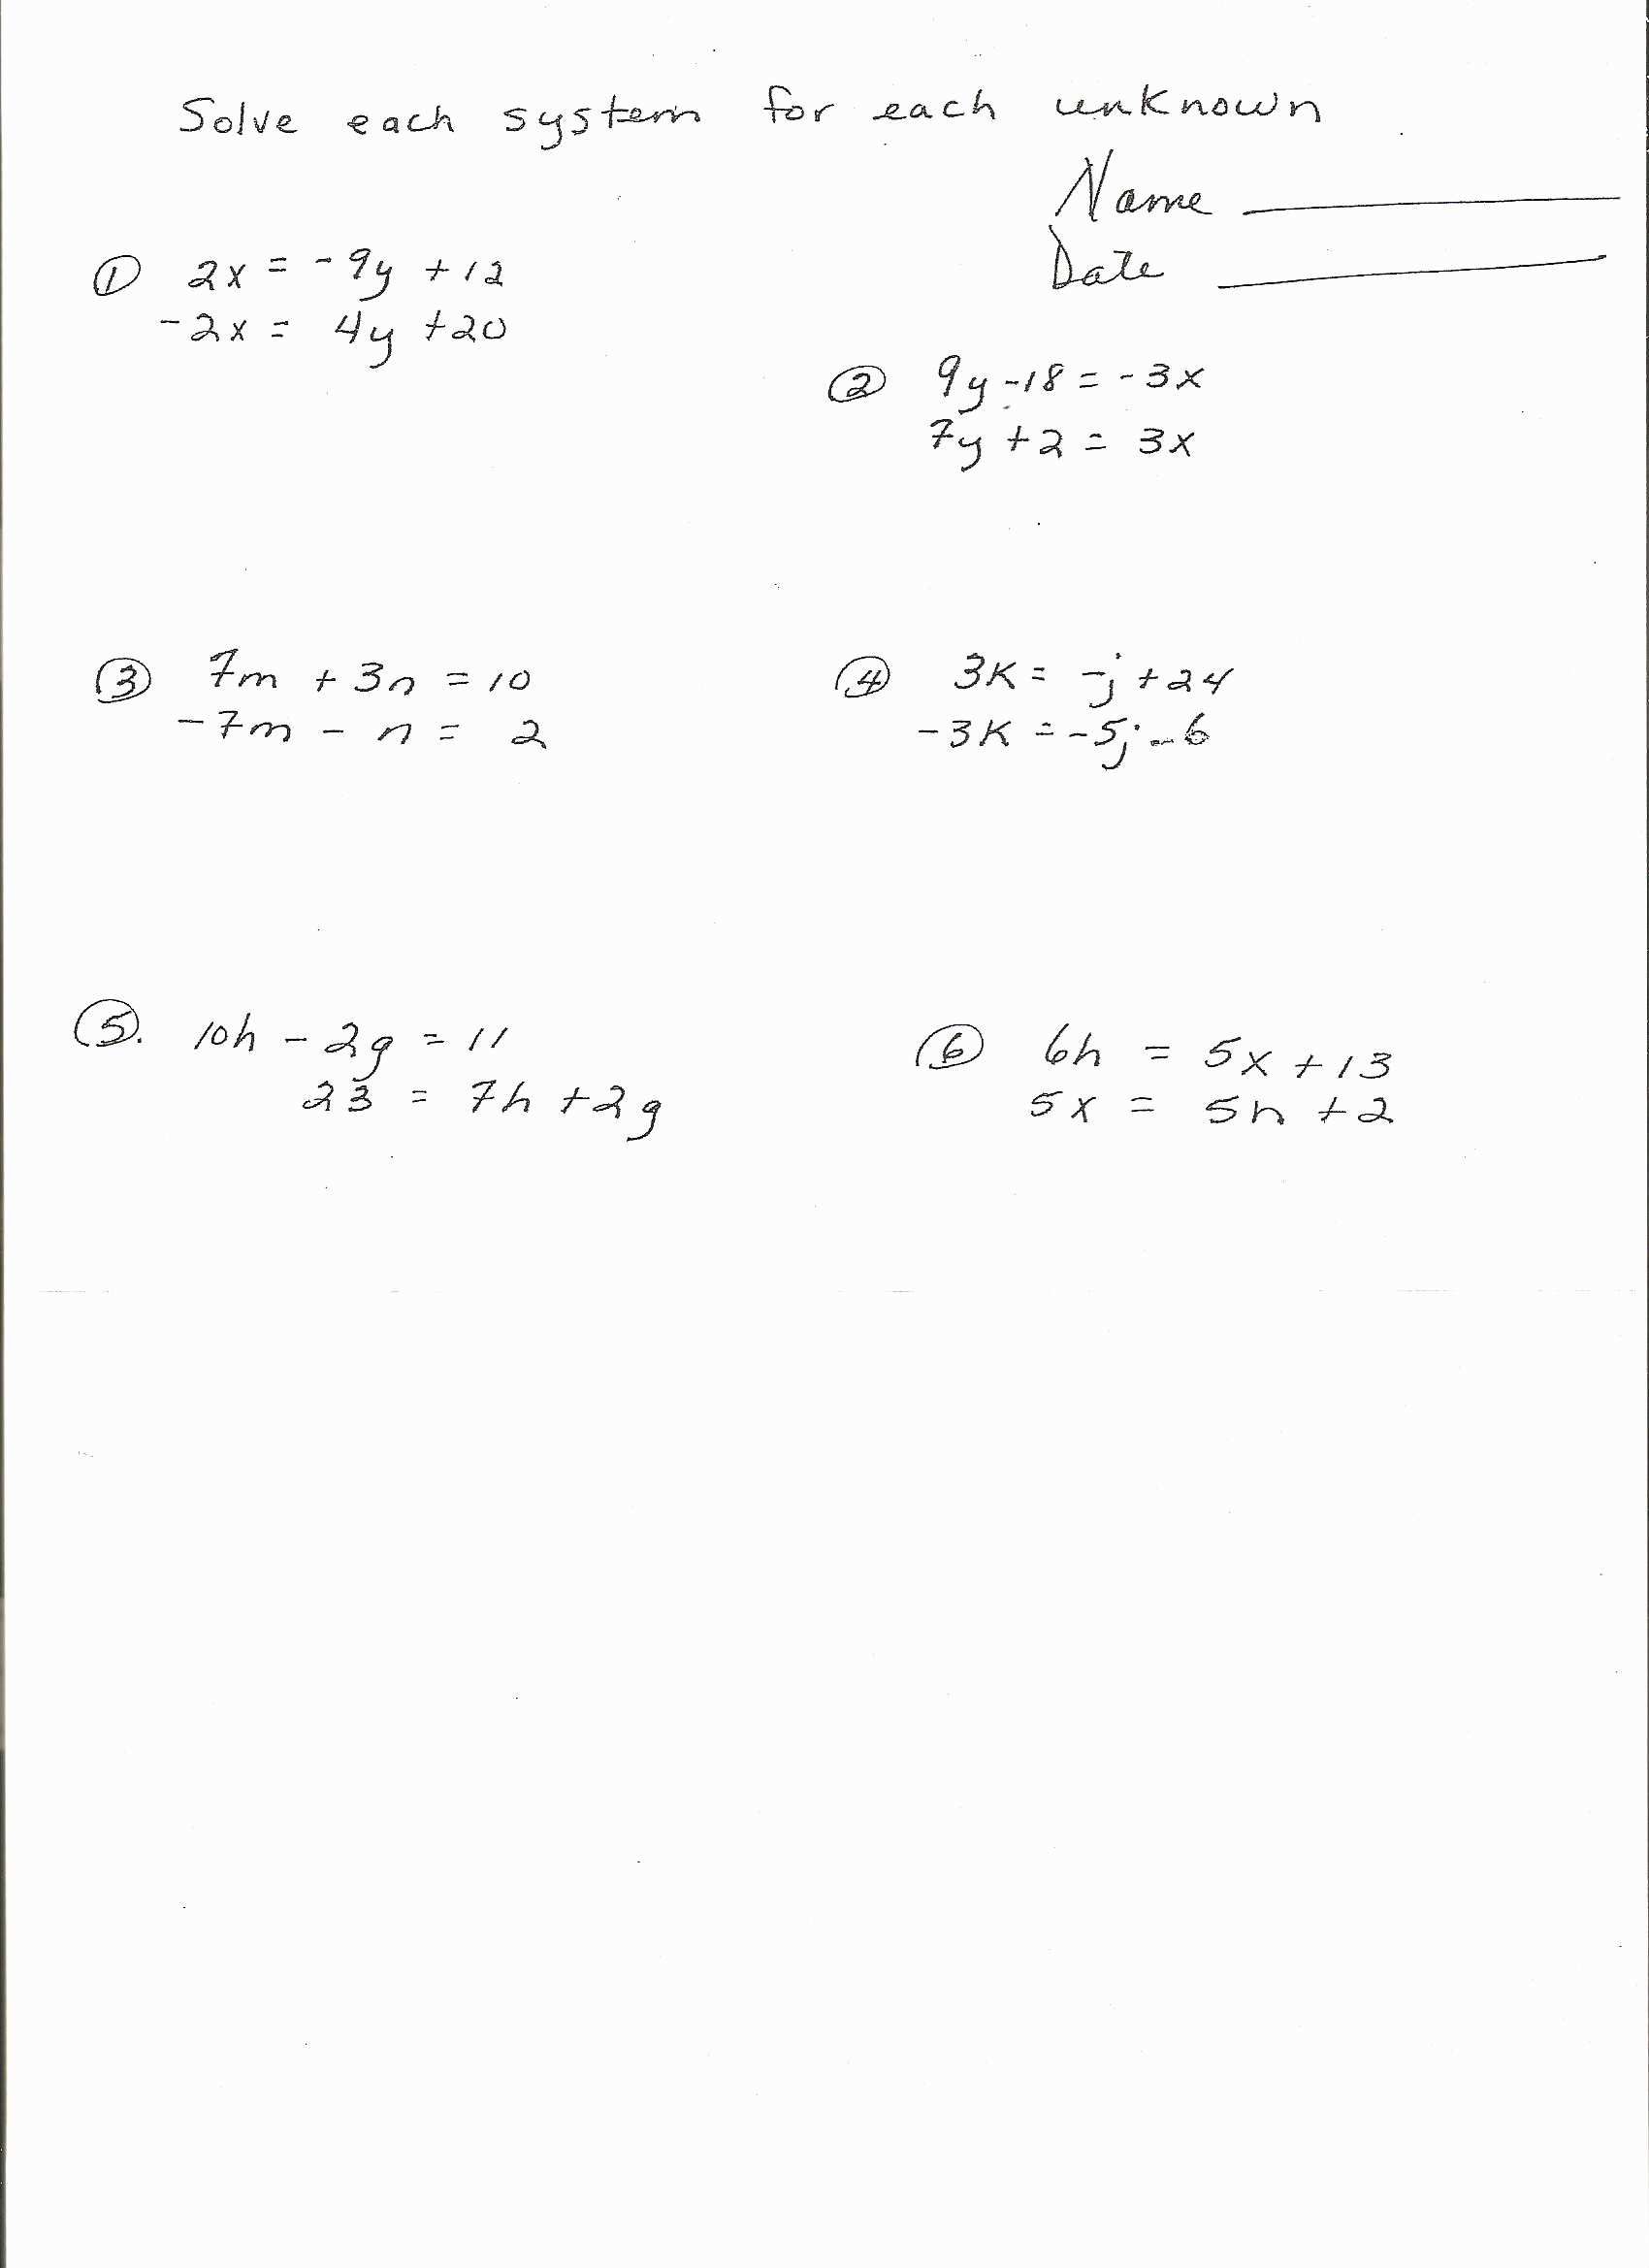 Lines Worksheet Writing Linear Equations From Graphs Worksheet Writing Linear Equations From Graphs Worksheet Linear Equations